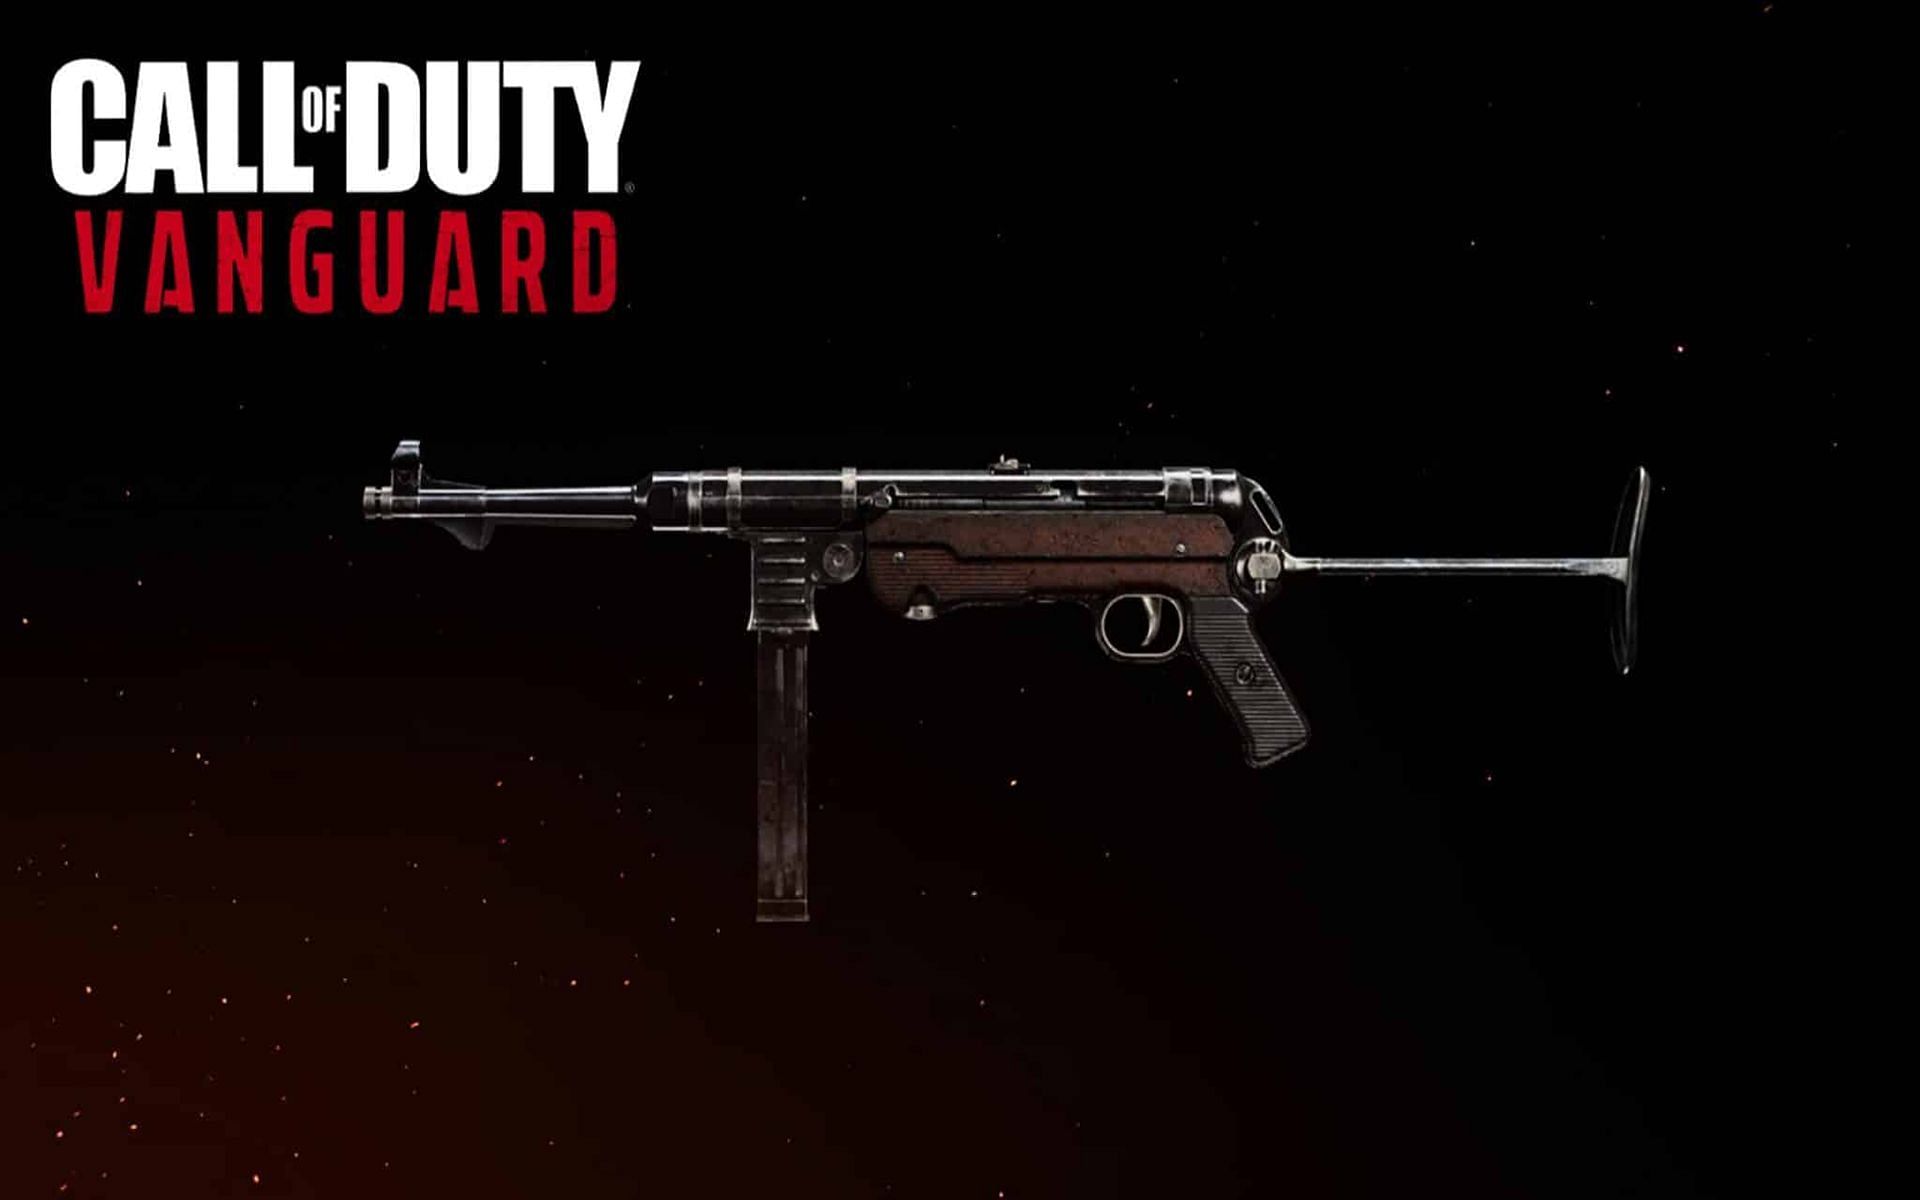 MP-40 is one of the best SMGs in Call of Duty: Vanguard (Image via Activision)